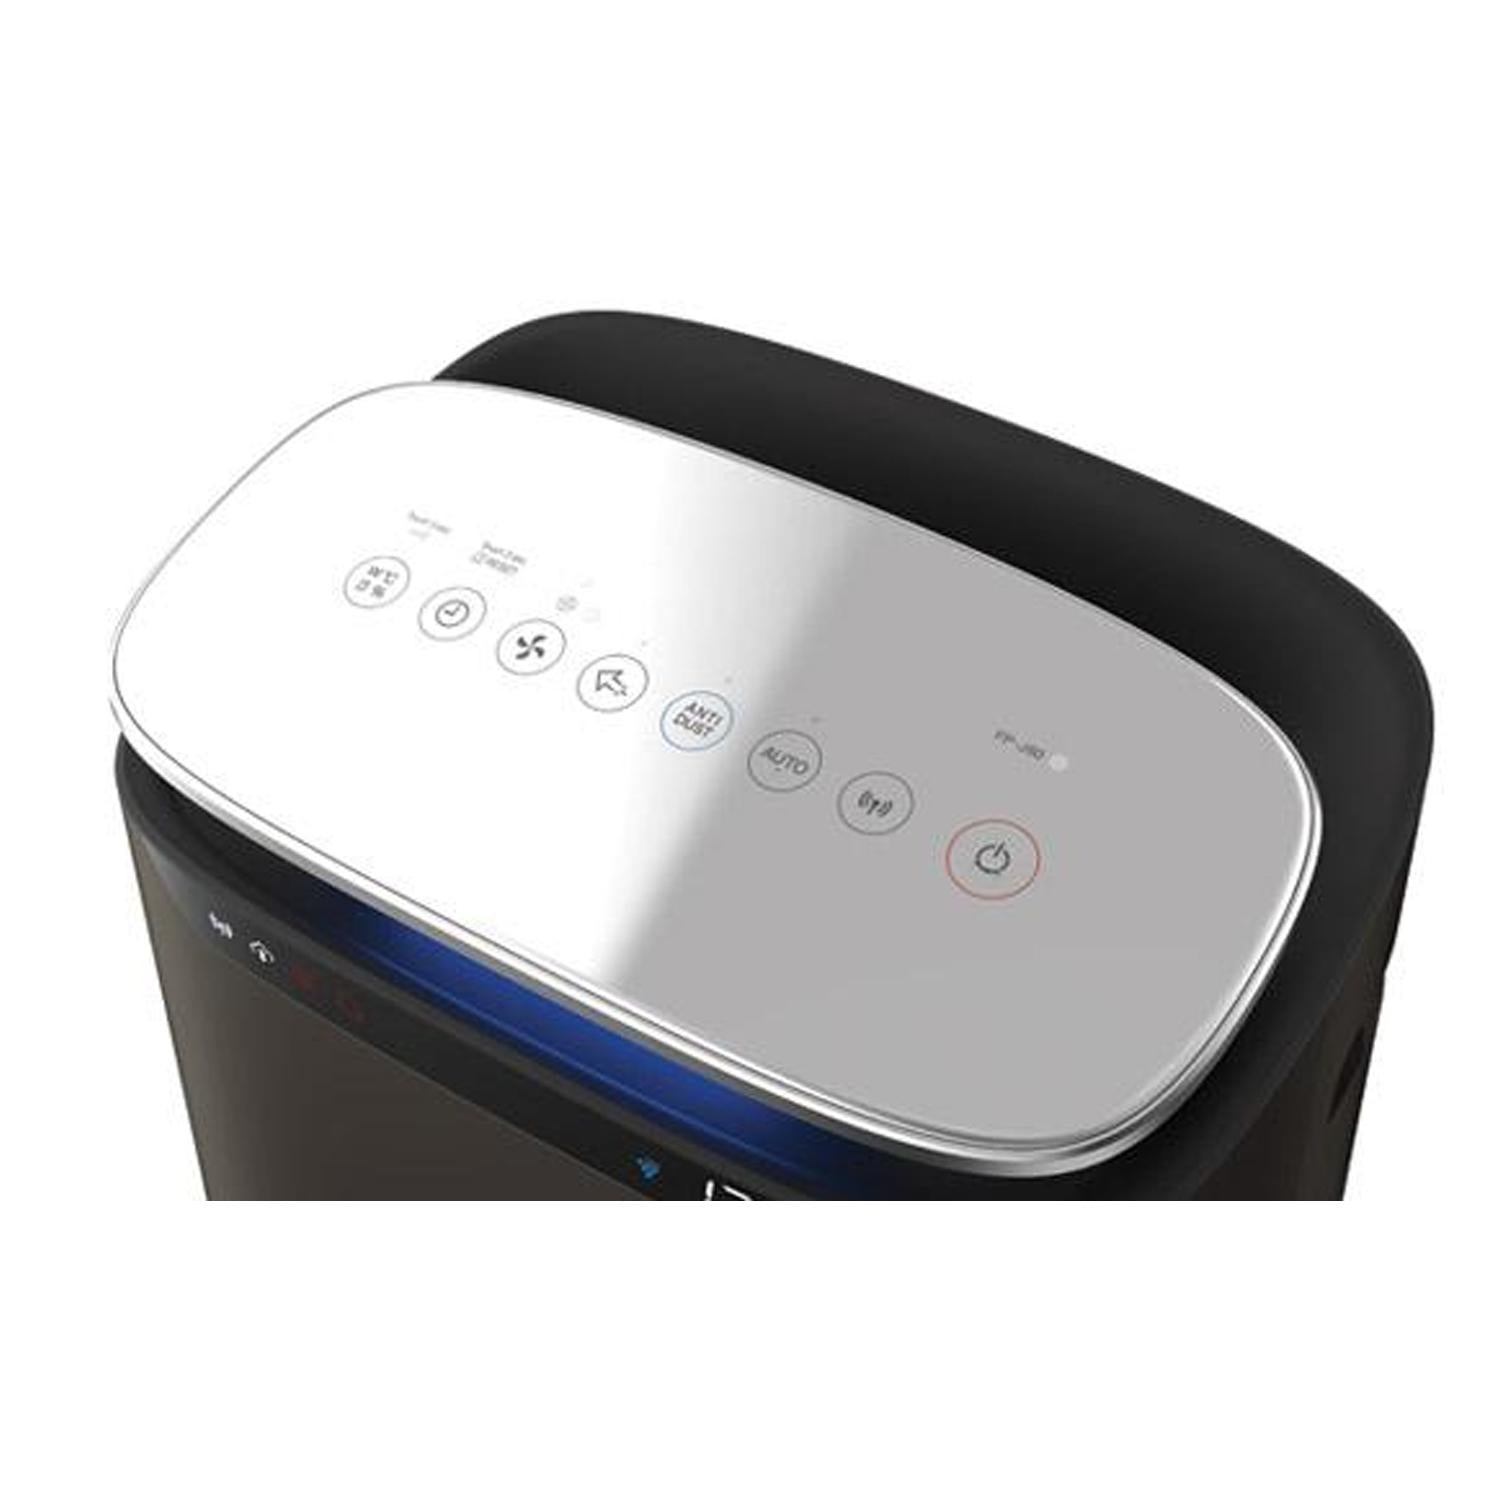 Sharp FP-J80EP-H Air Plasmacluster Intelligent Air Purifier with (WIFI) AioT function